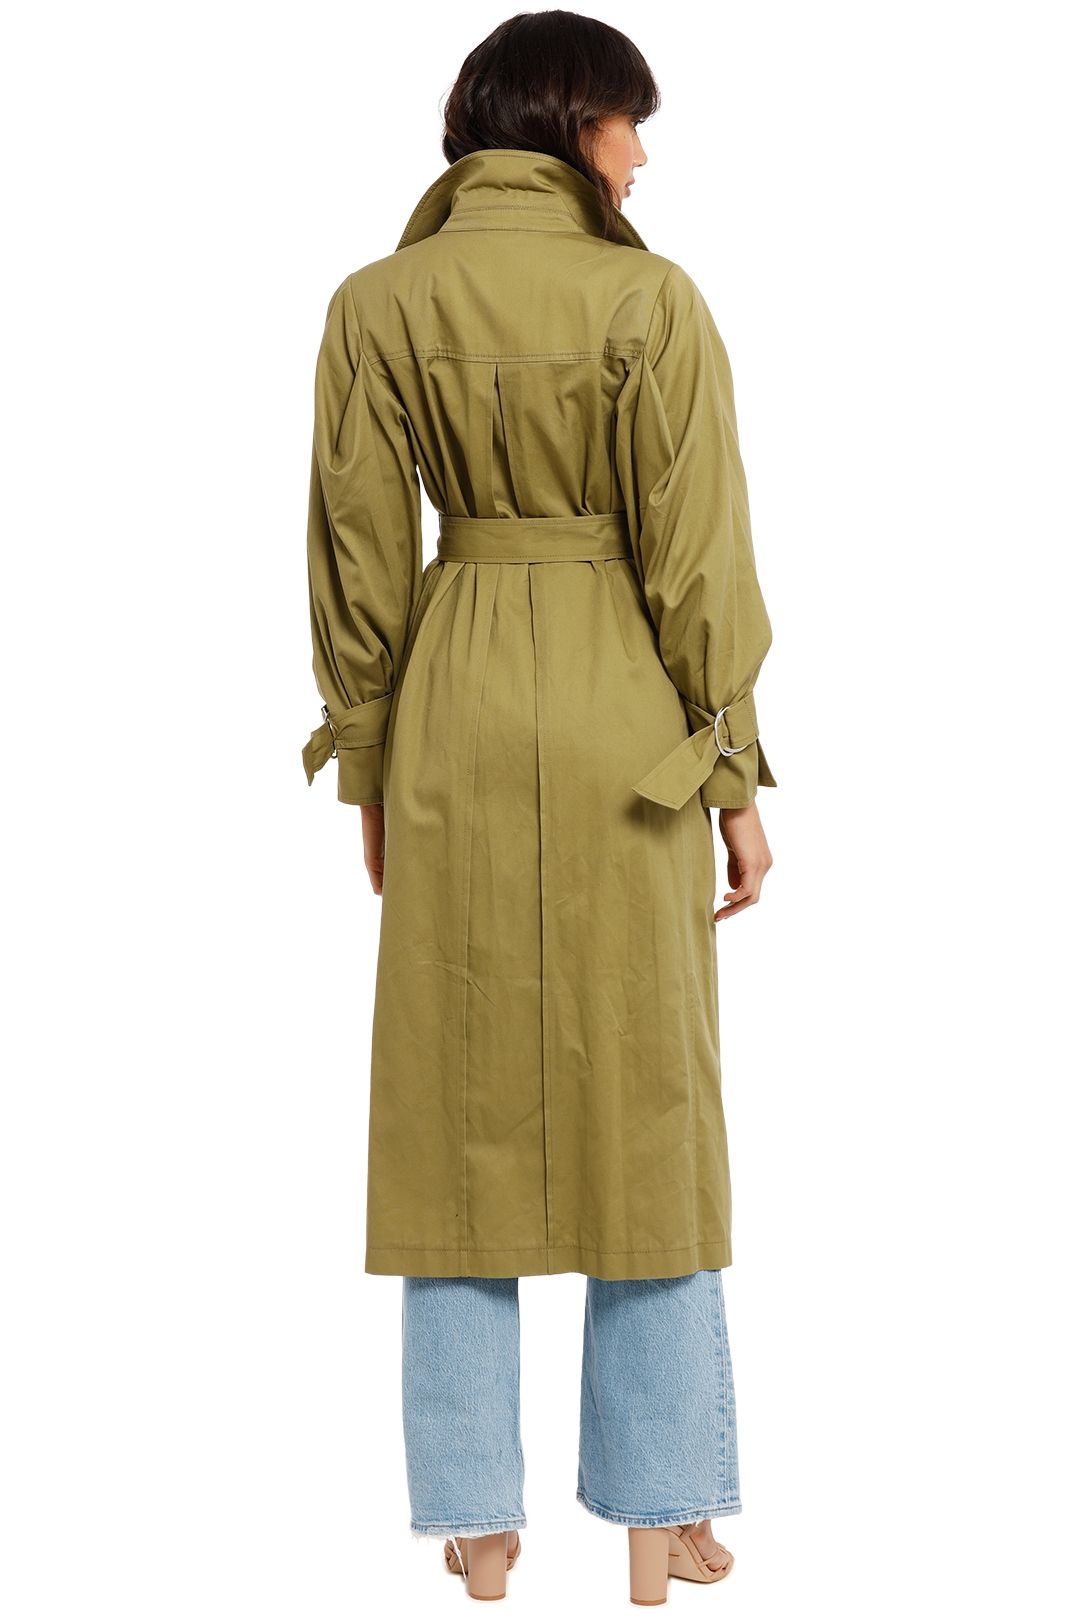 Magali Pascal Stevie Trench Olive lapel